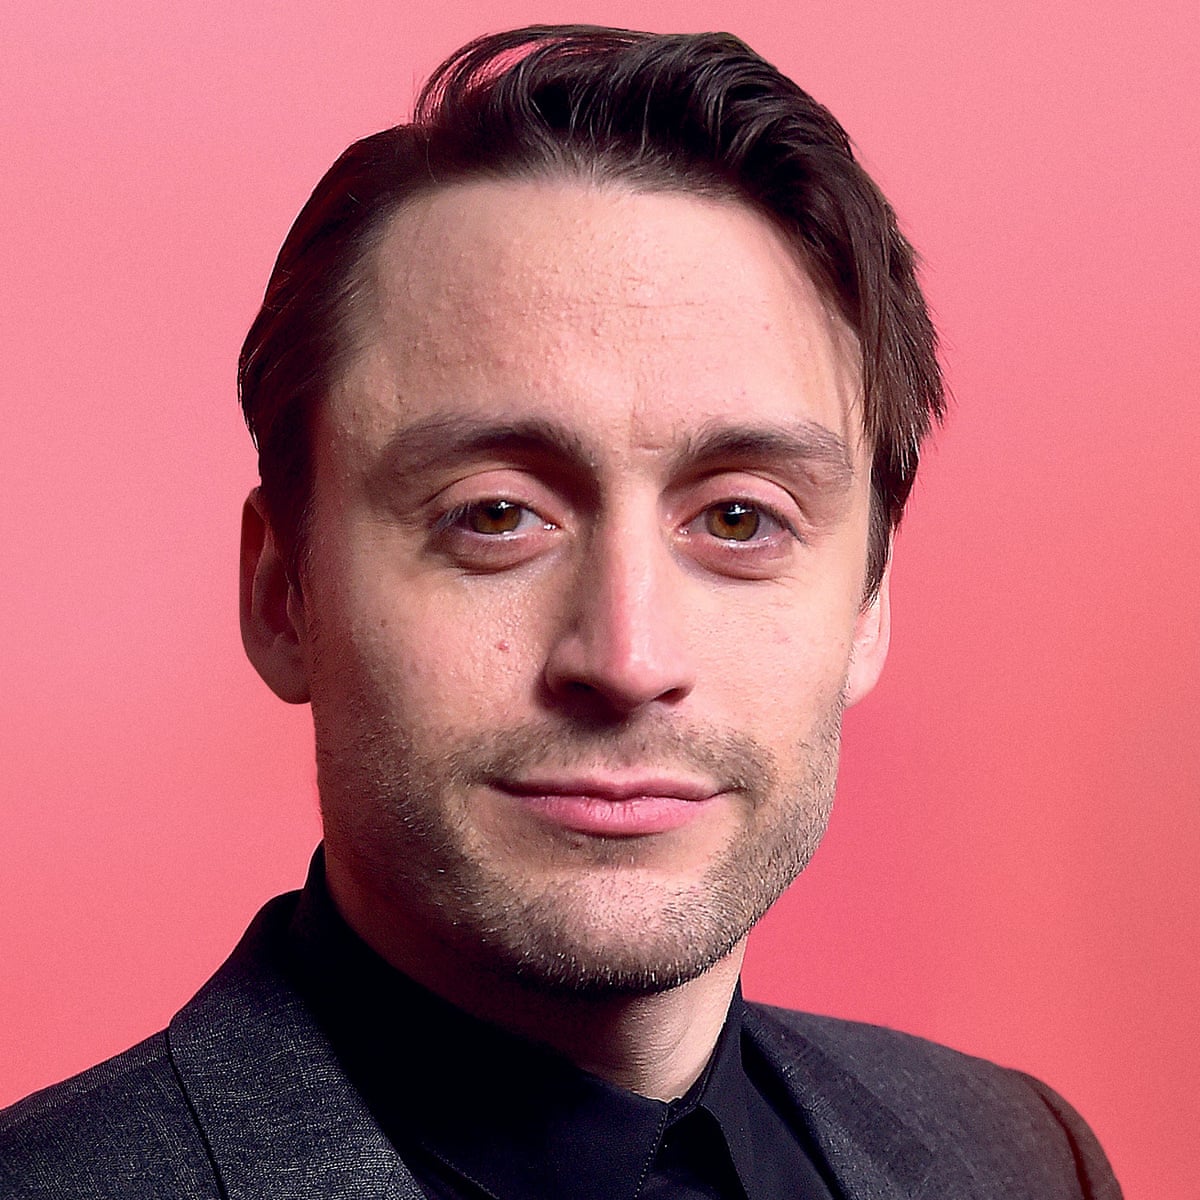 The 40-year old son of father (?) and mother(?) Kieran Culkin in 2023 photo. Kieran Culkin earned a  million dollar salary - leaving the net worth at  million in 2023